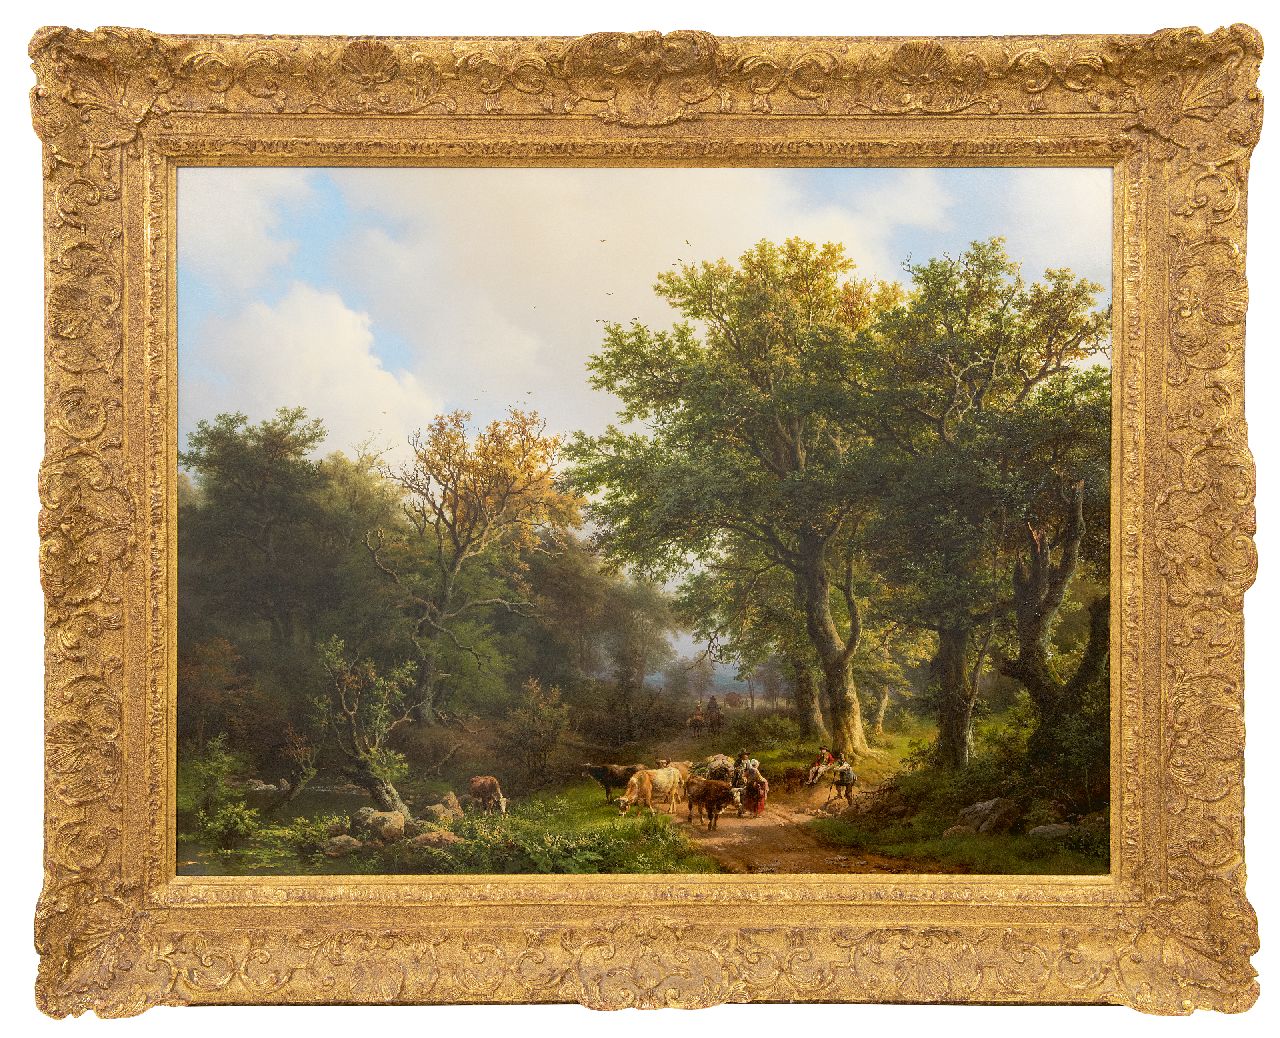 Koekkoek B.C.  | Barend Cornelis Koekkoek | Paintings offered for sale | Forest view with cattle, oil on panel 69.1 x 90.2 cm, signed l.r. and dated 1853